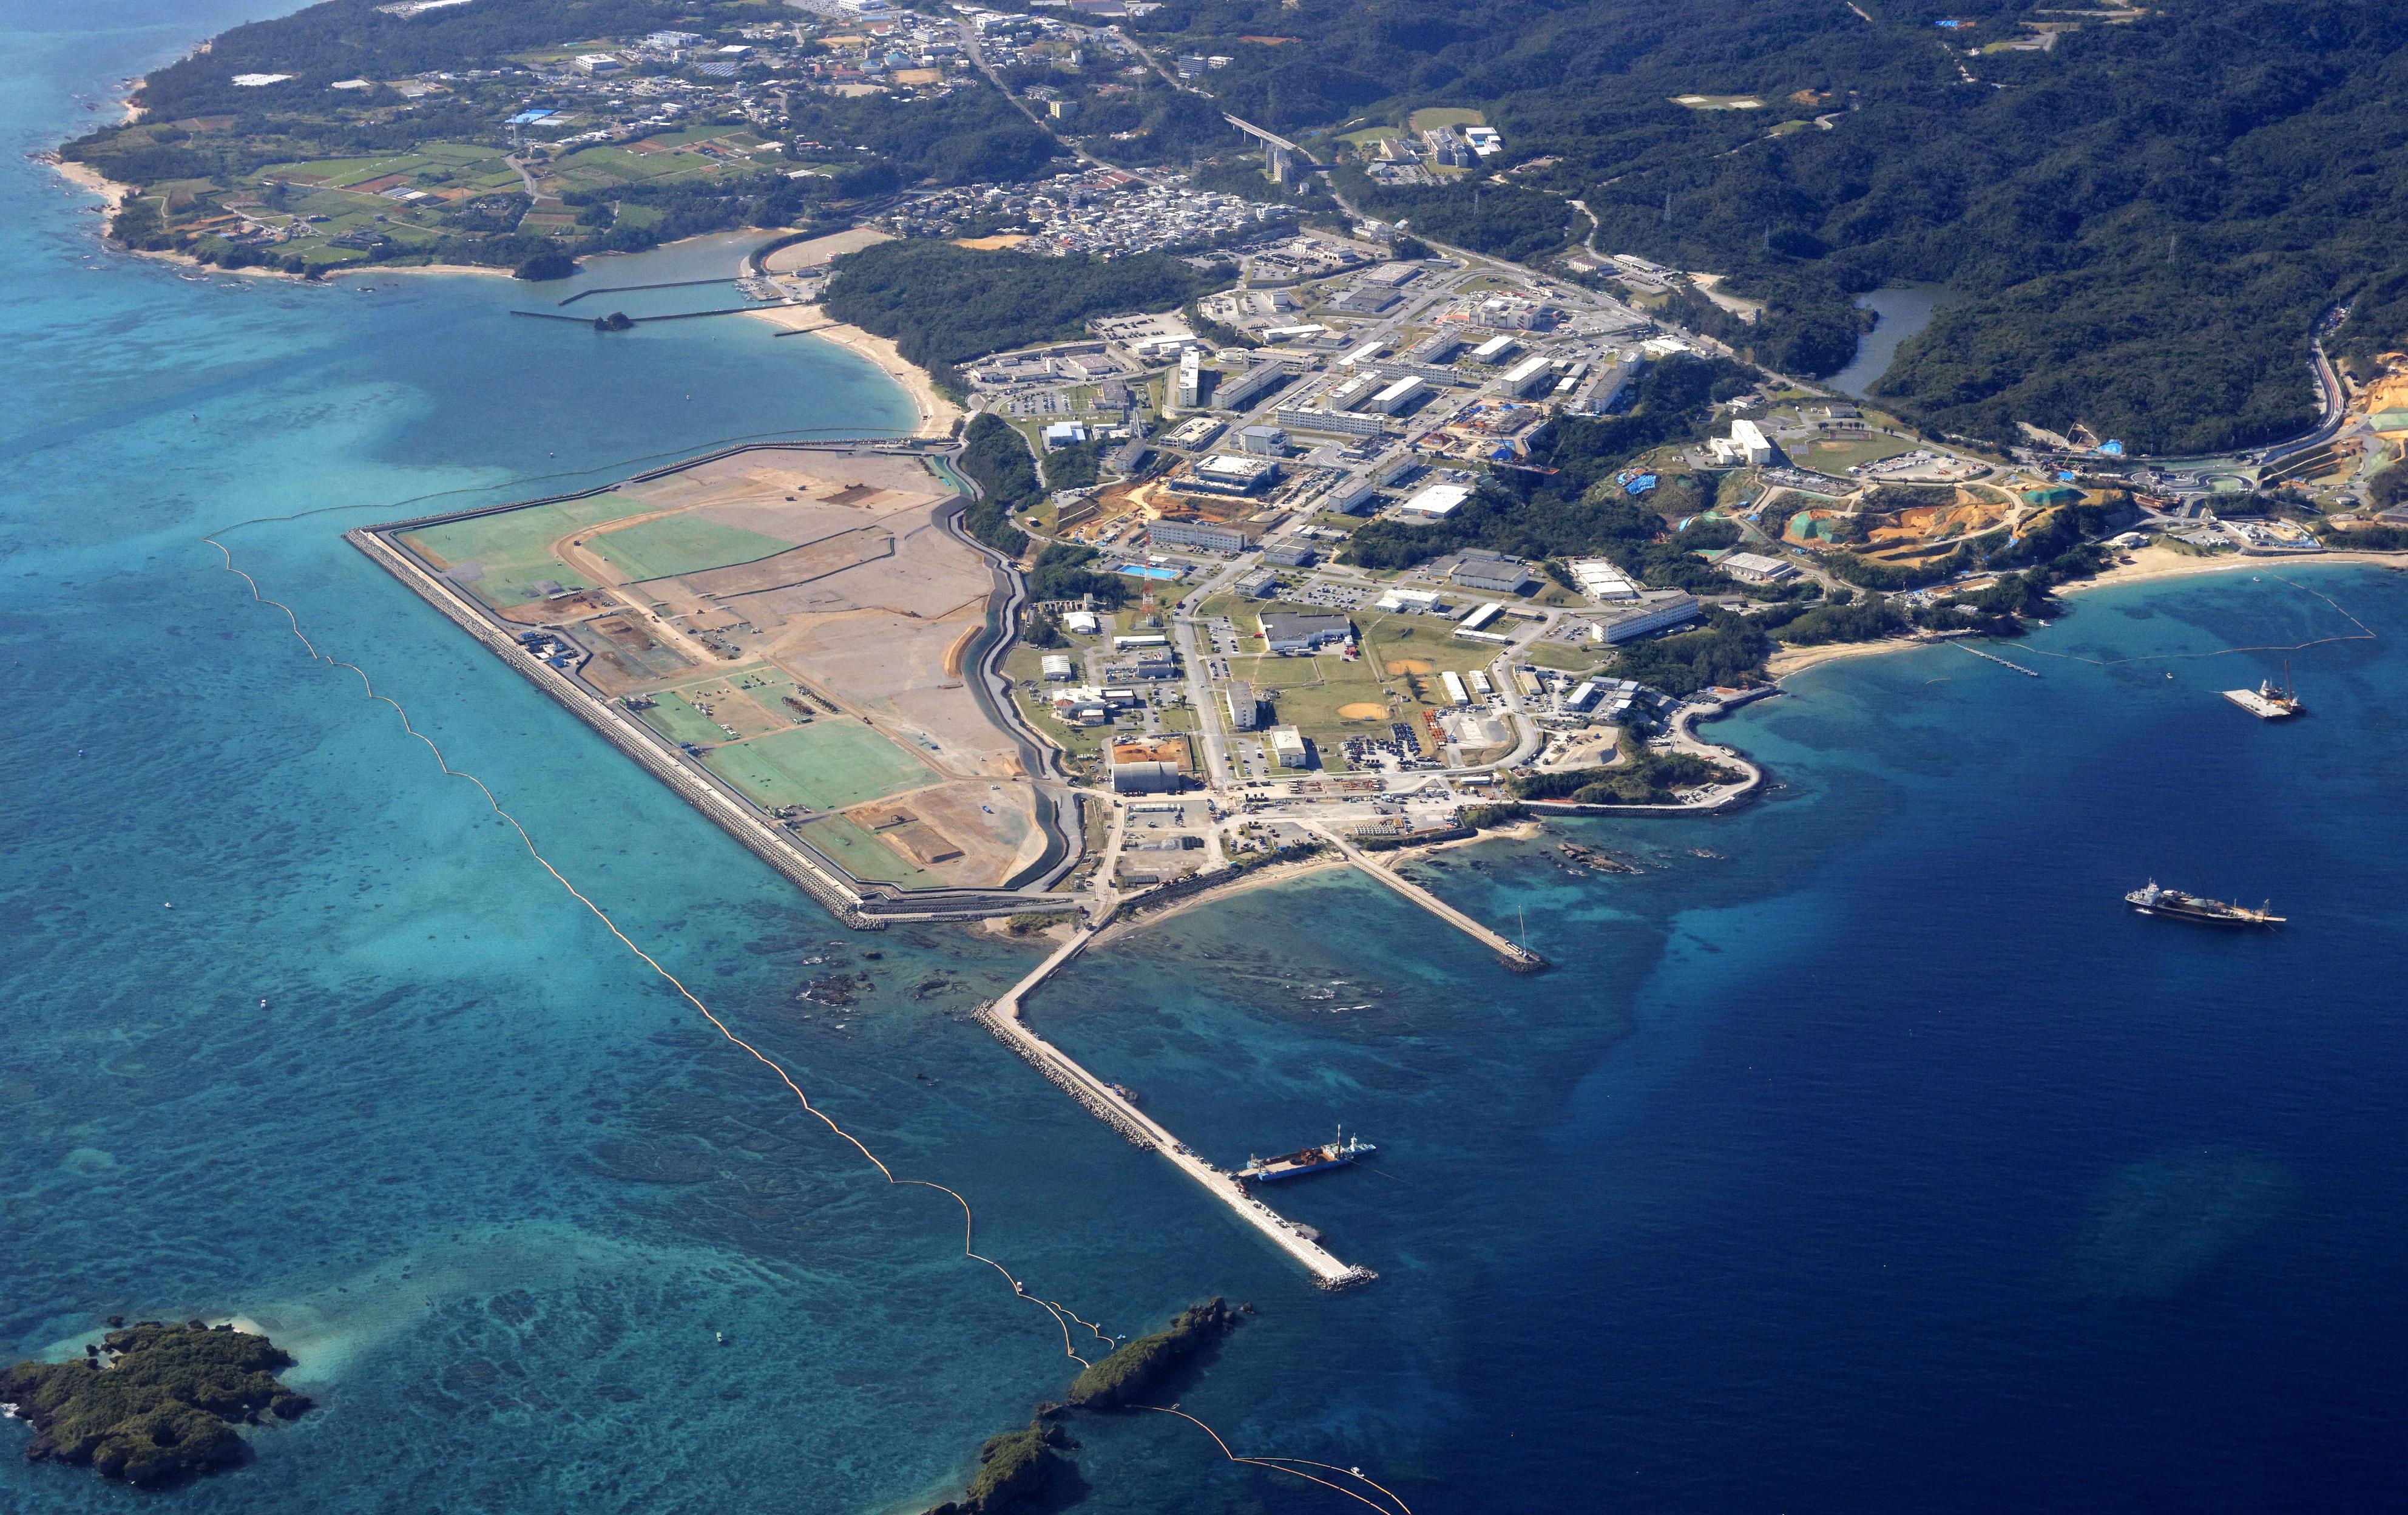 An overhead of a US military base on a small Japanese island in Okinawa